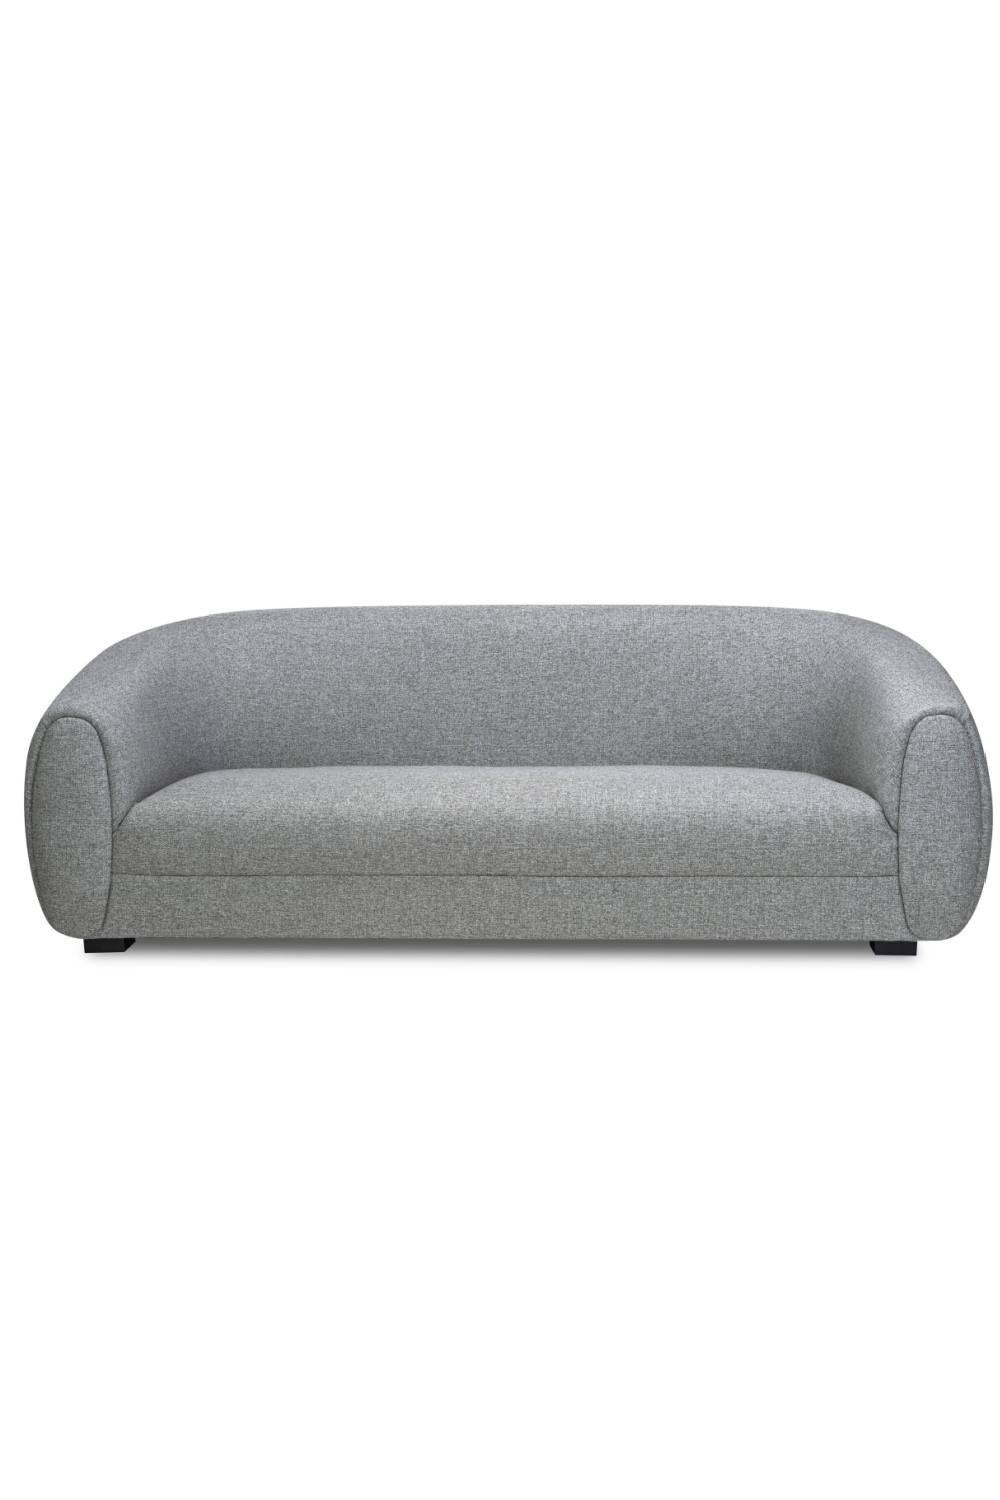 Gray Rounded Sofa | Liang & Eimil Voltaire | Oroa.com